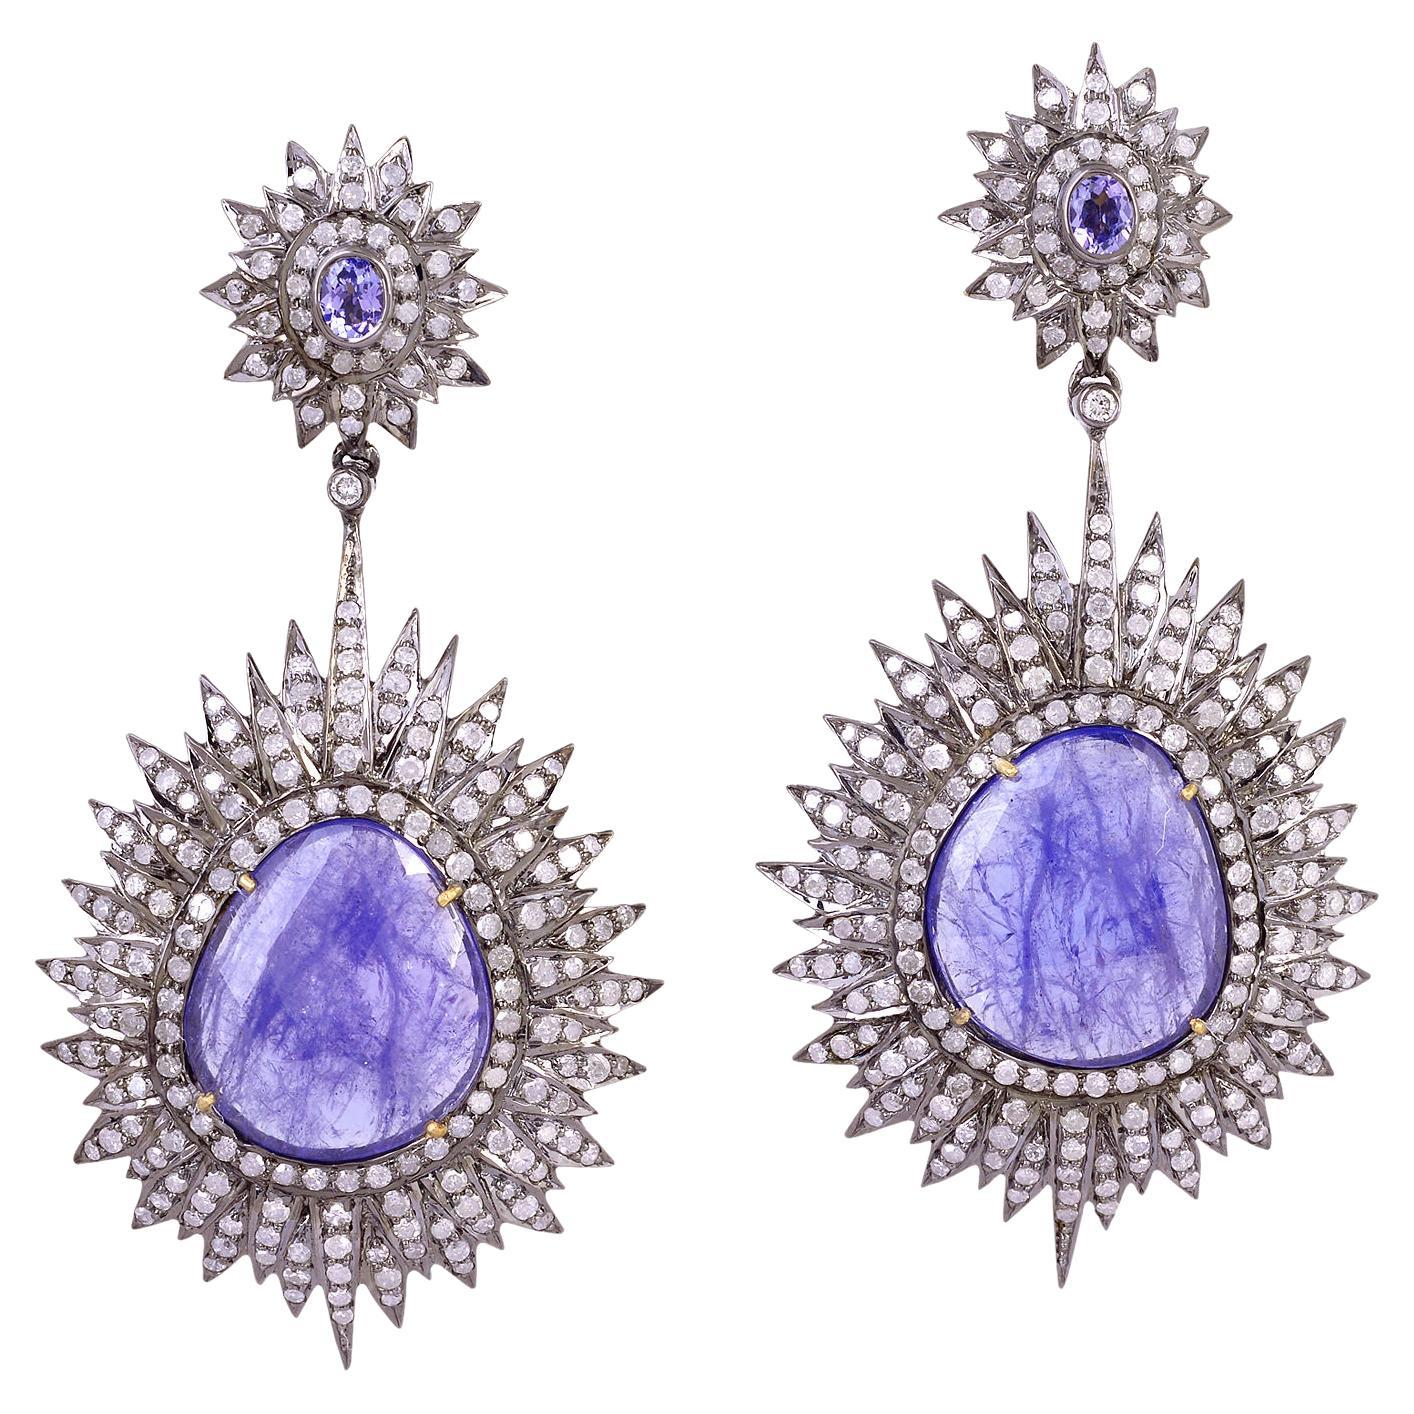 Tanzanite Sunburst Earrings With Diamonds Made In 18k Gold & Silver For Sale